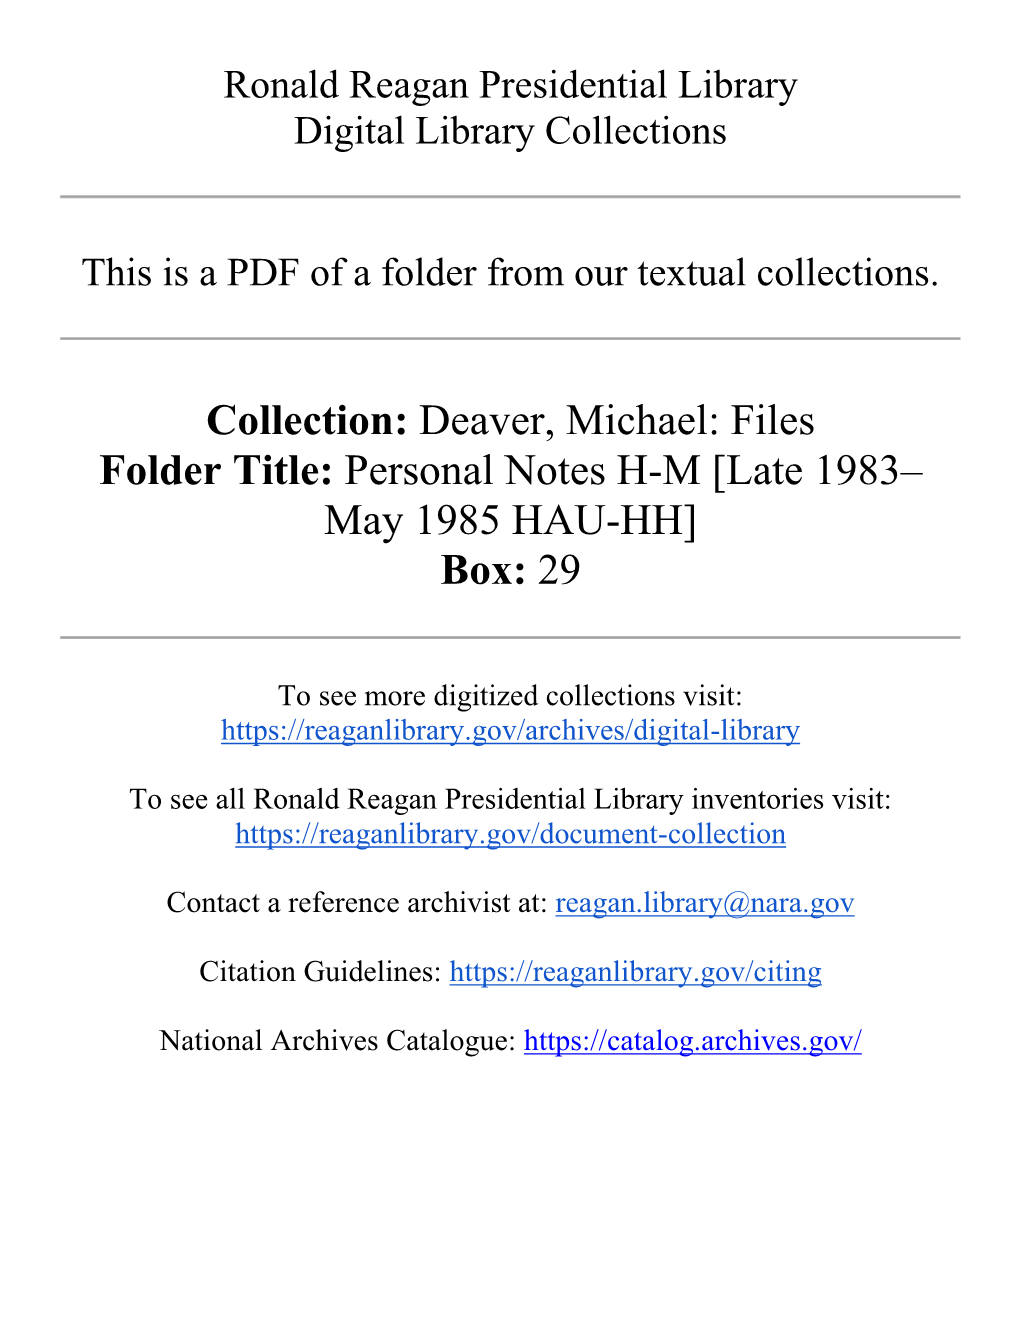 Deaver, Michael: Files Folder Title: Personal Notes H-M [Late 1983– May 1985 HAU-HH] Box: 29